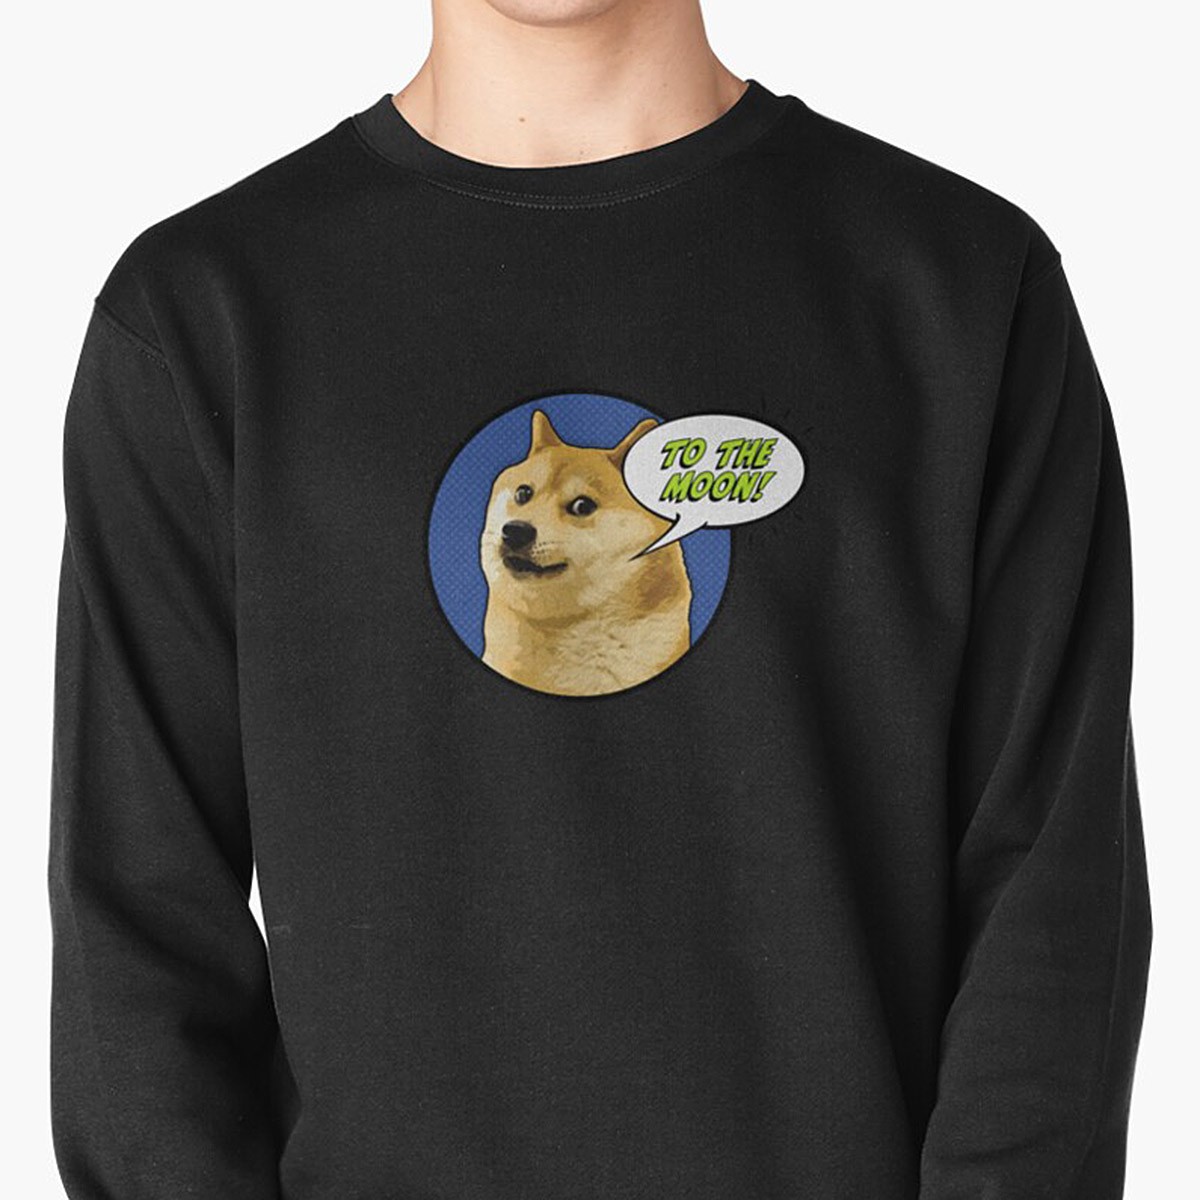 Doge To The Moon!! Pullover Sweatshirt by NTK Apparel